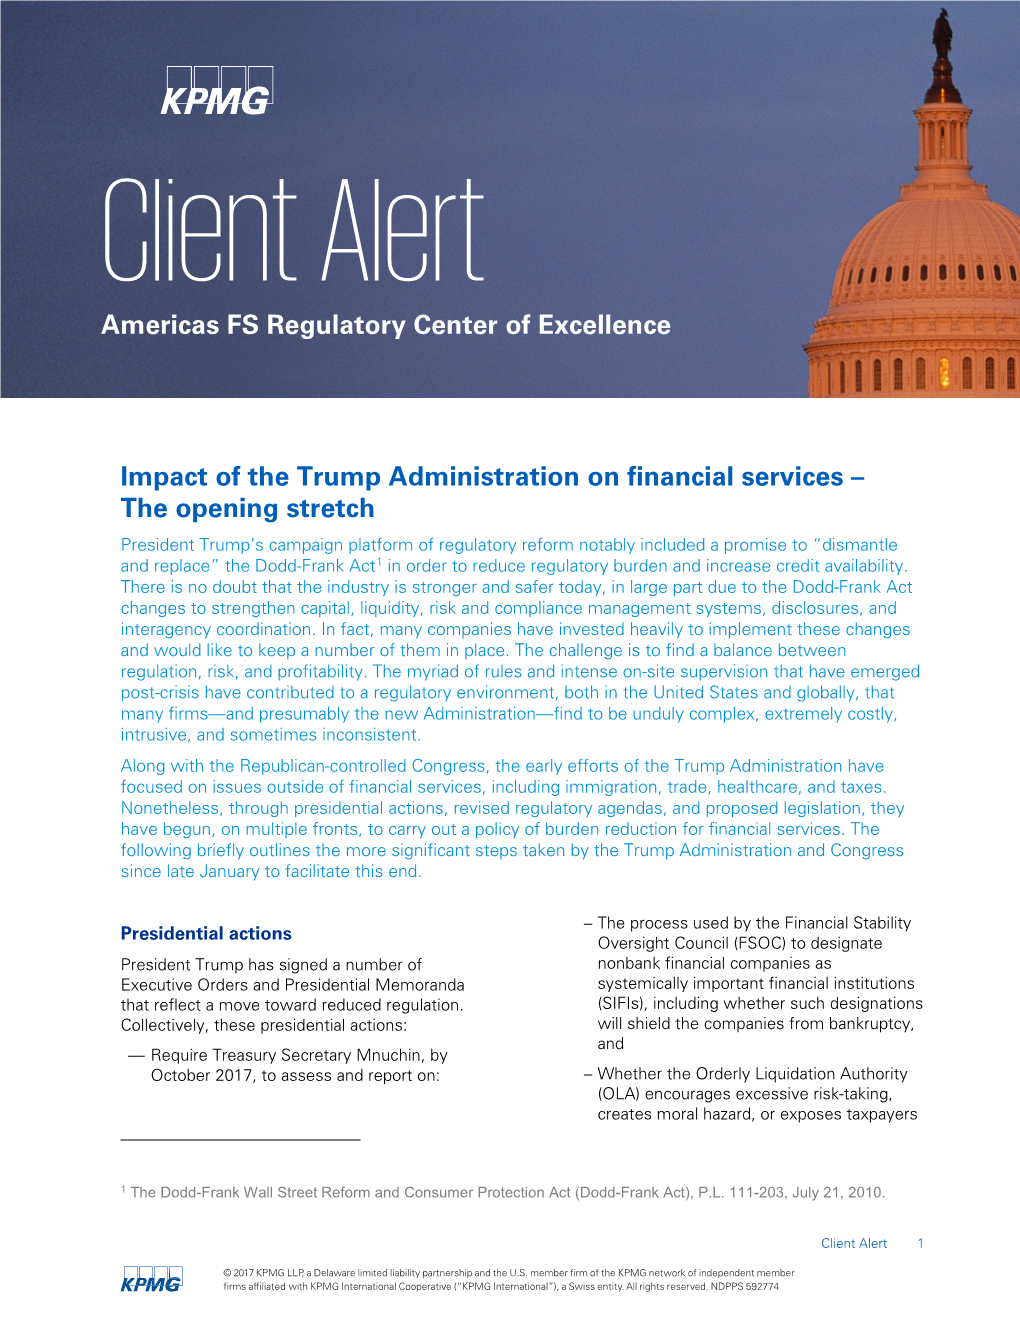 Impact of the Trump Administration on Financial Services – the Opening Stretch Americas FS Regulatory Center of Excellence